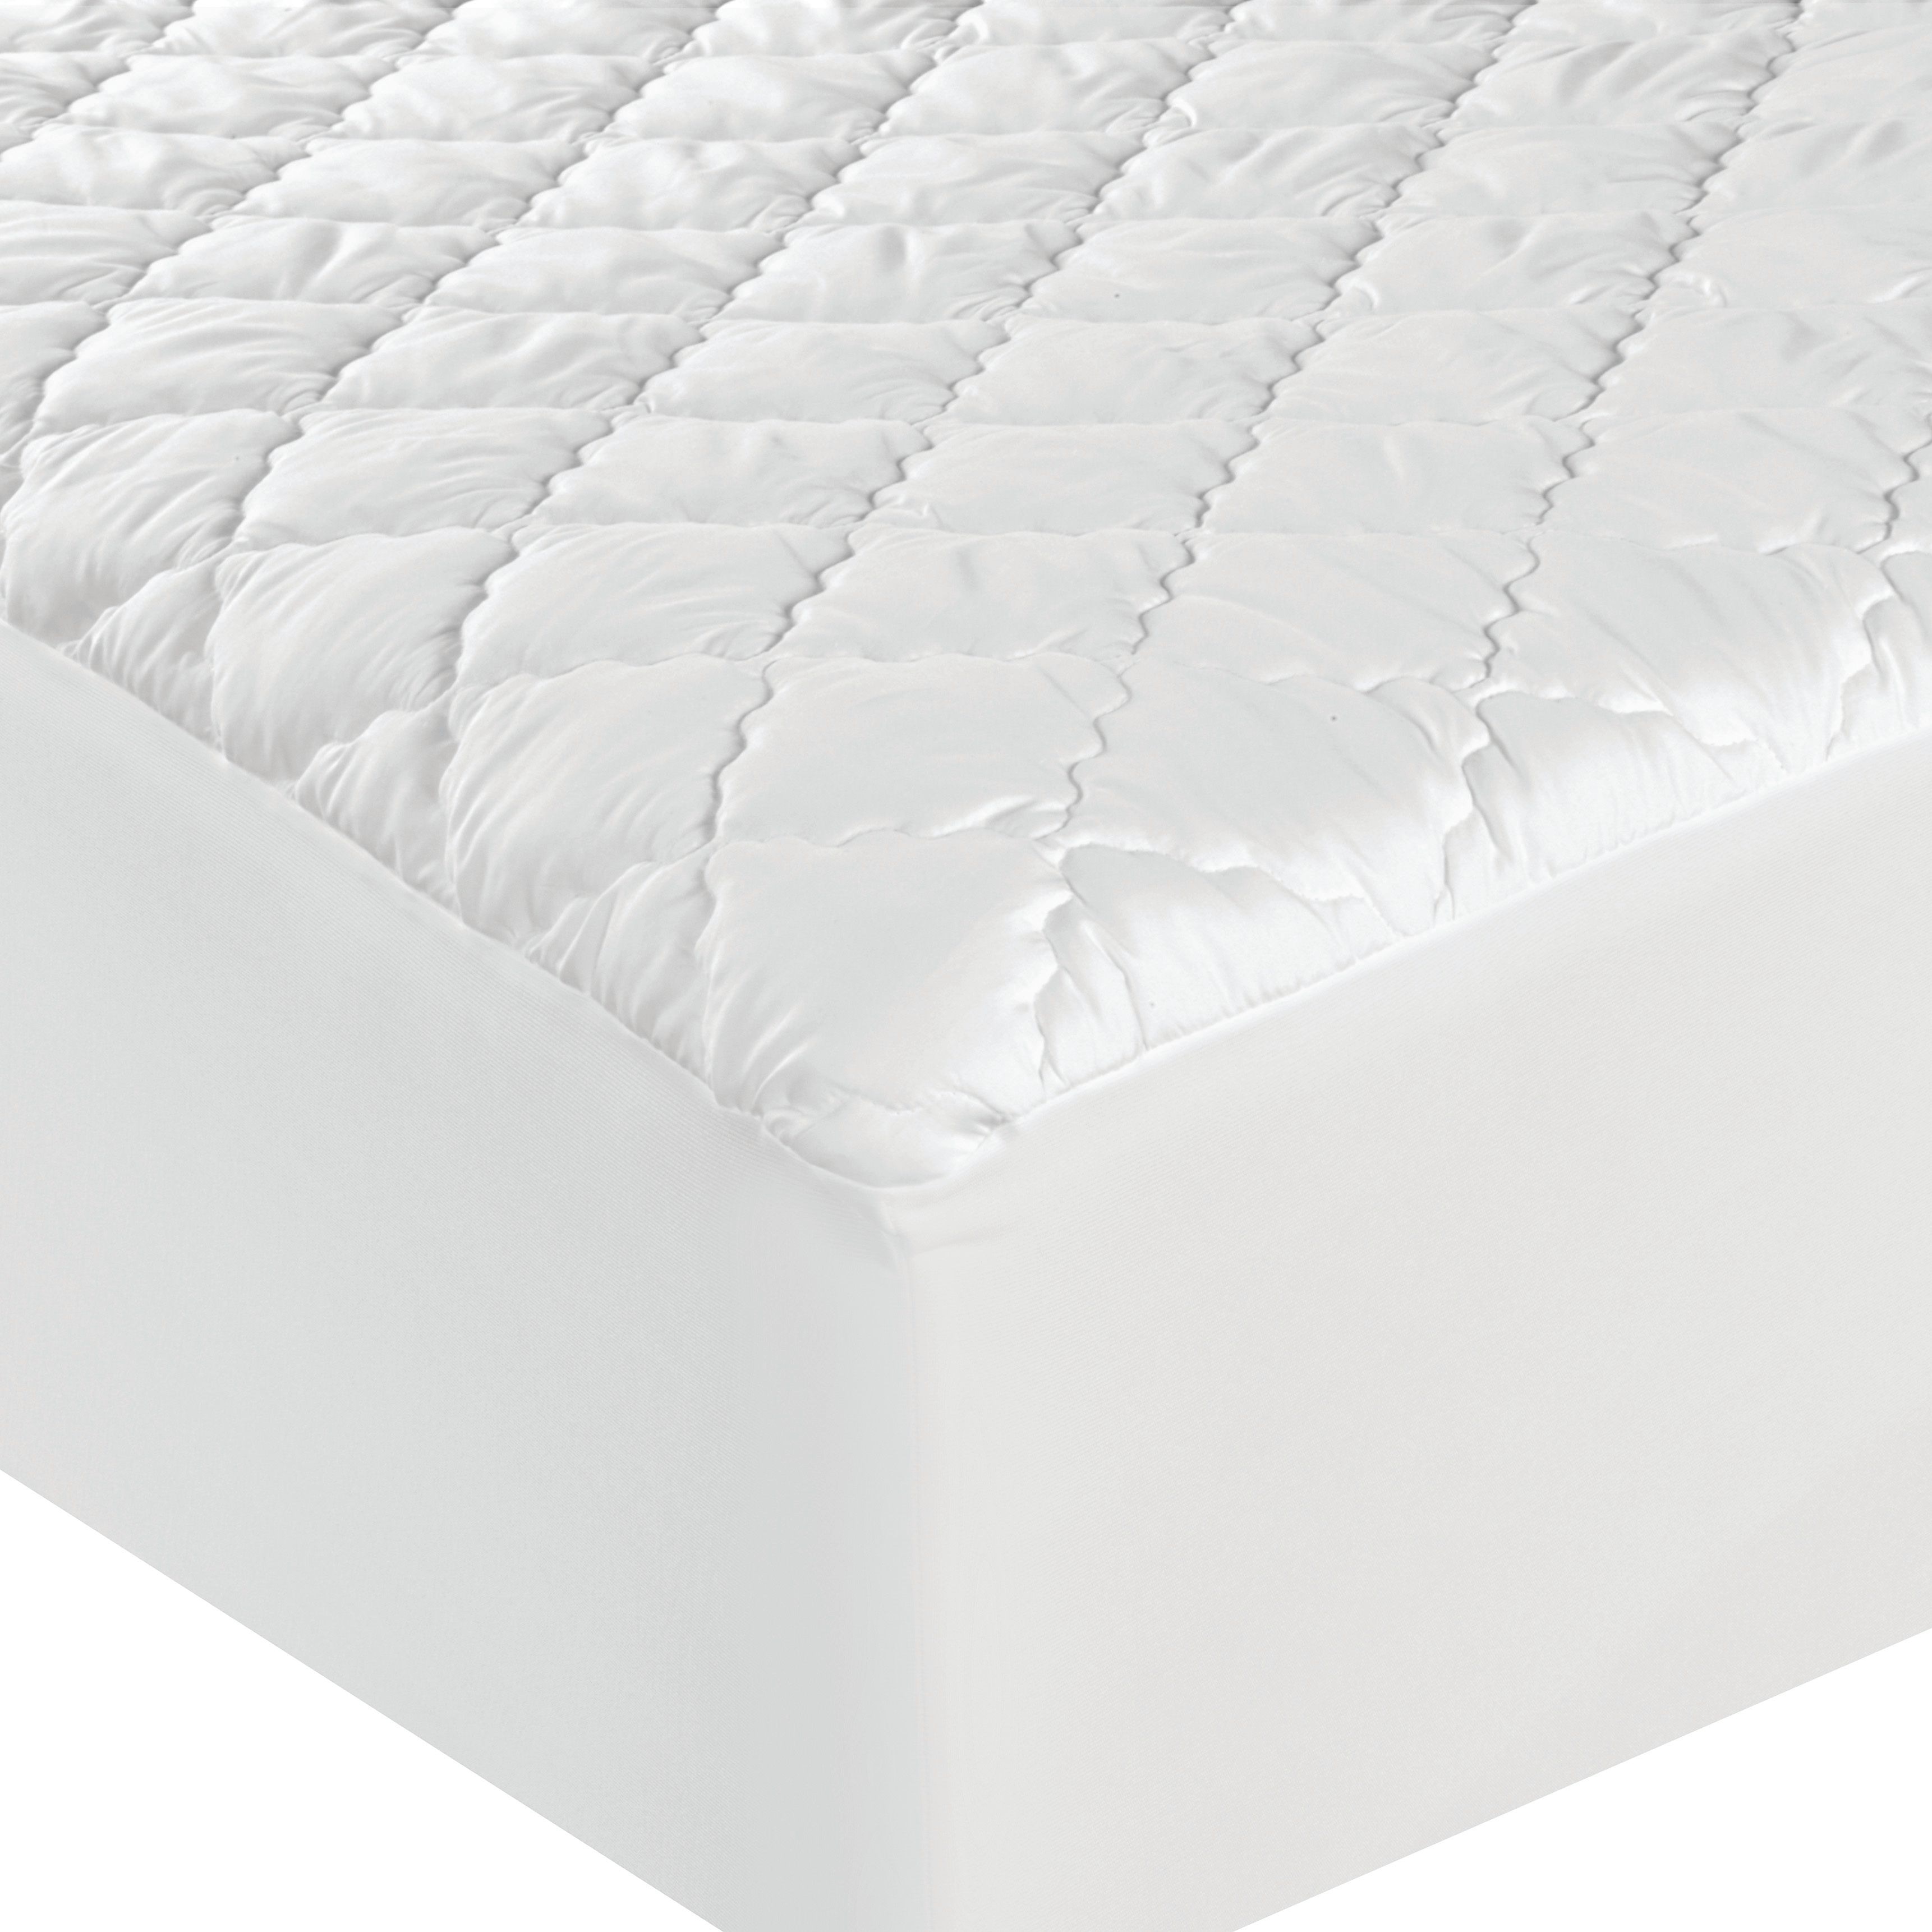 Sealy Moisture Wicking Mattress Pad Queen White American Textile Company 106-VH 